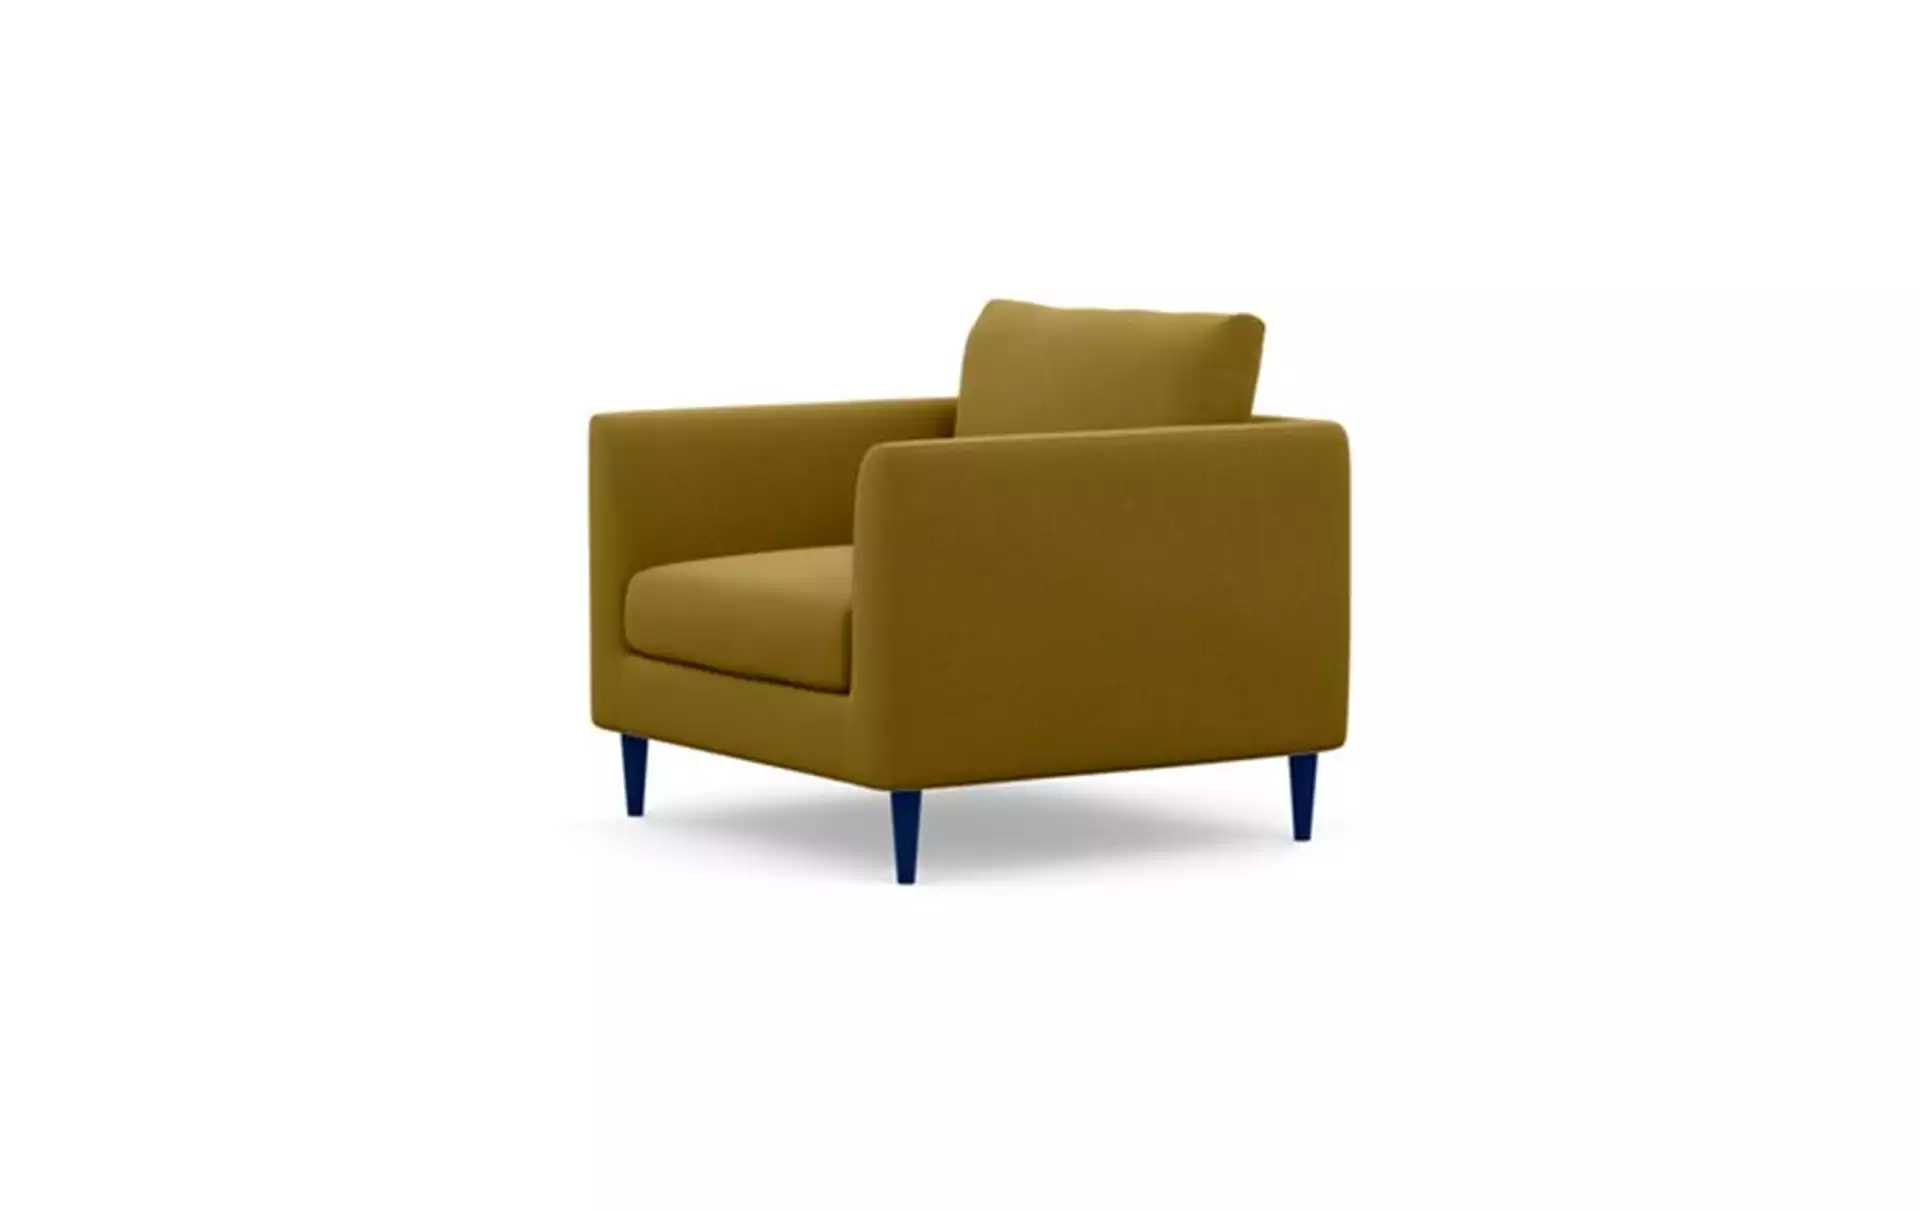 Owens Accent Chair with Yellow Yarrow Fabric and Matte Indigo legs